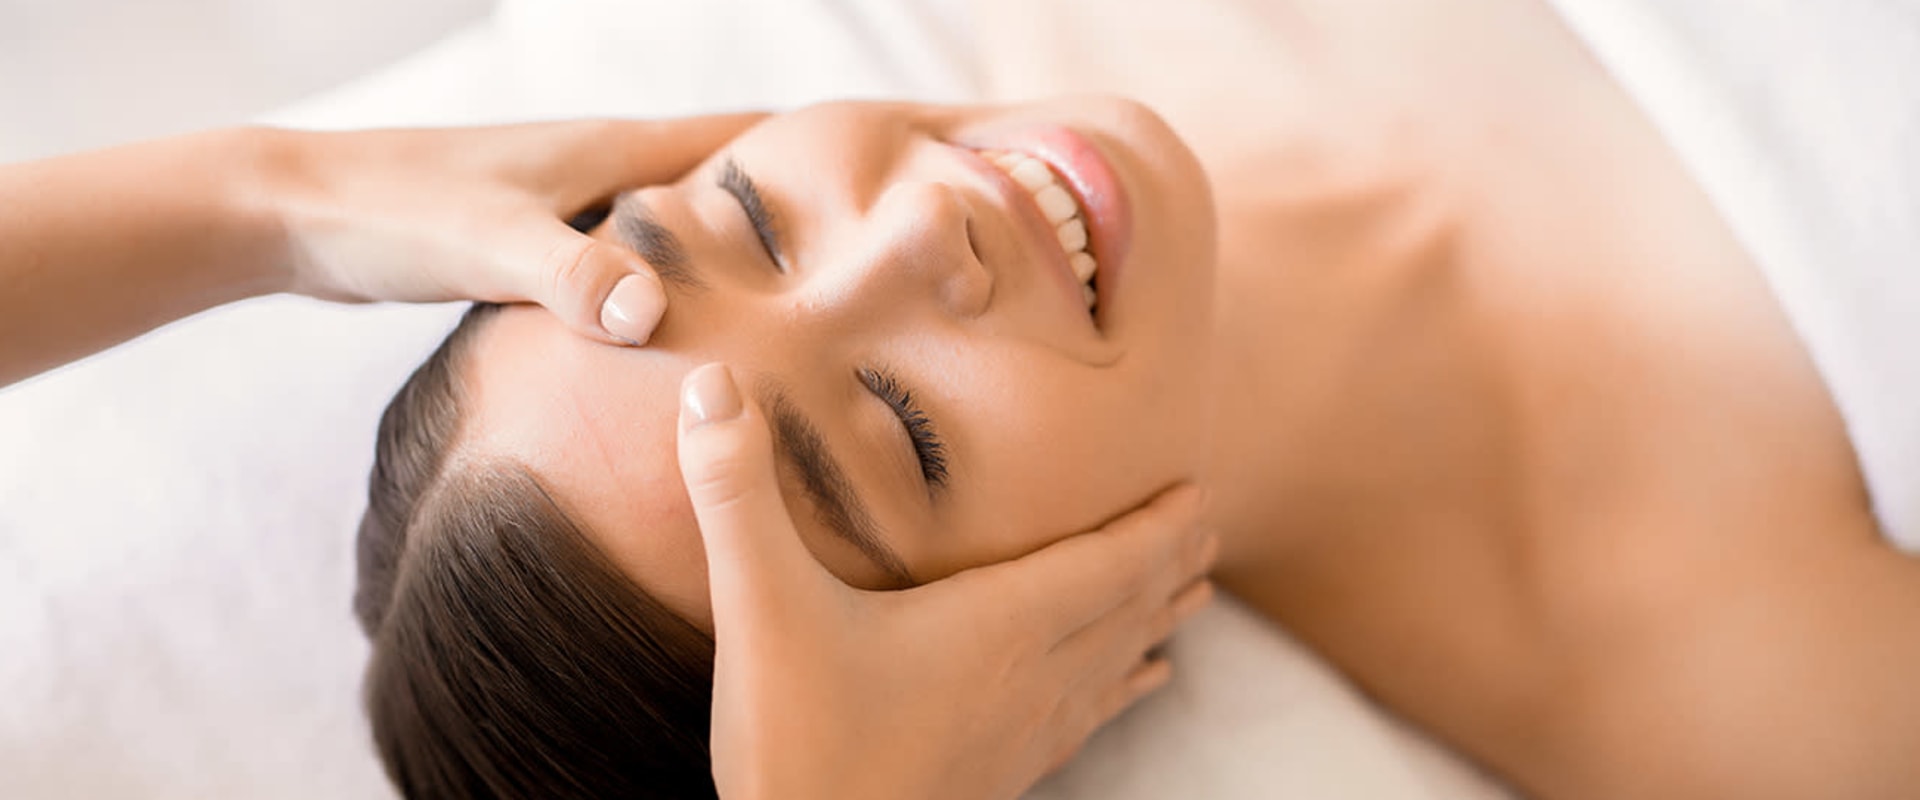 Customized Facial Spa Packages: An Engaging and Informative Overview